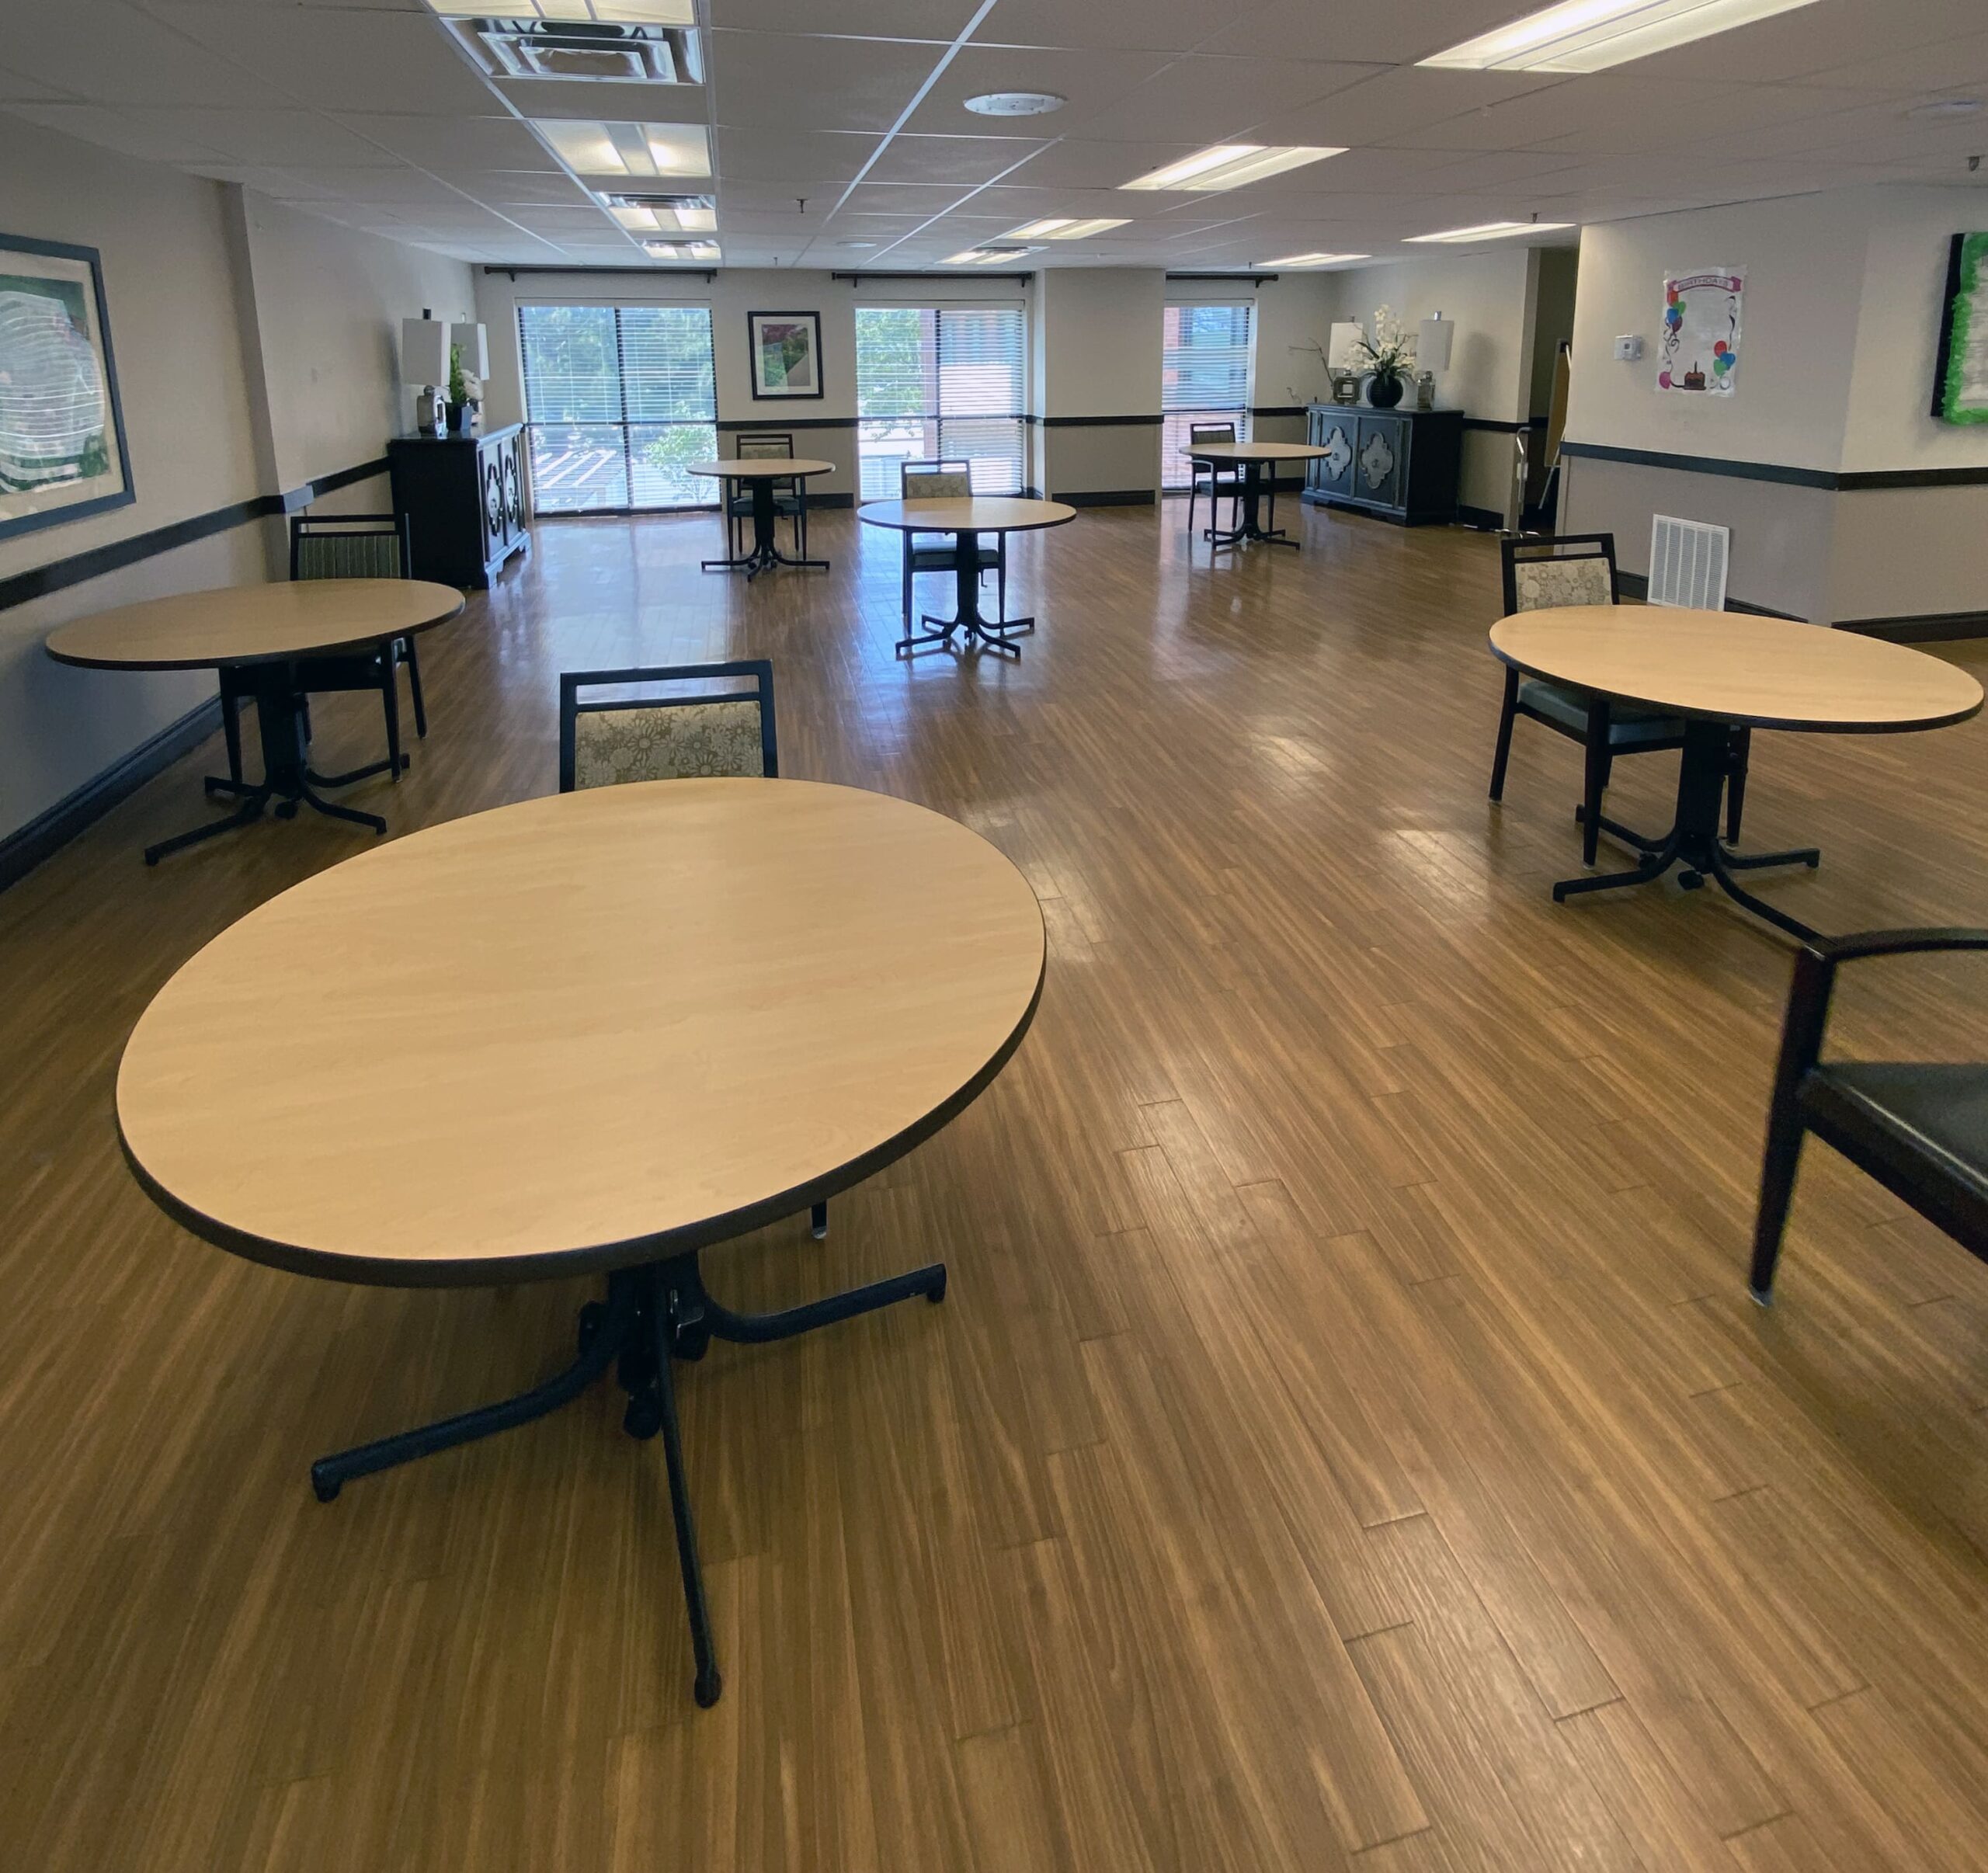 Brickyard Healthcare Willow Springs Care Center individual dining tables